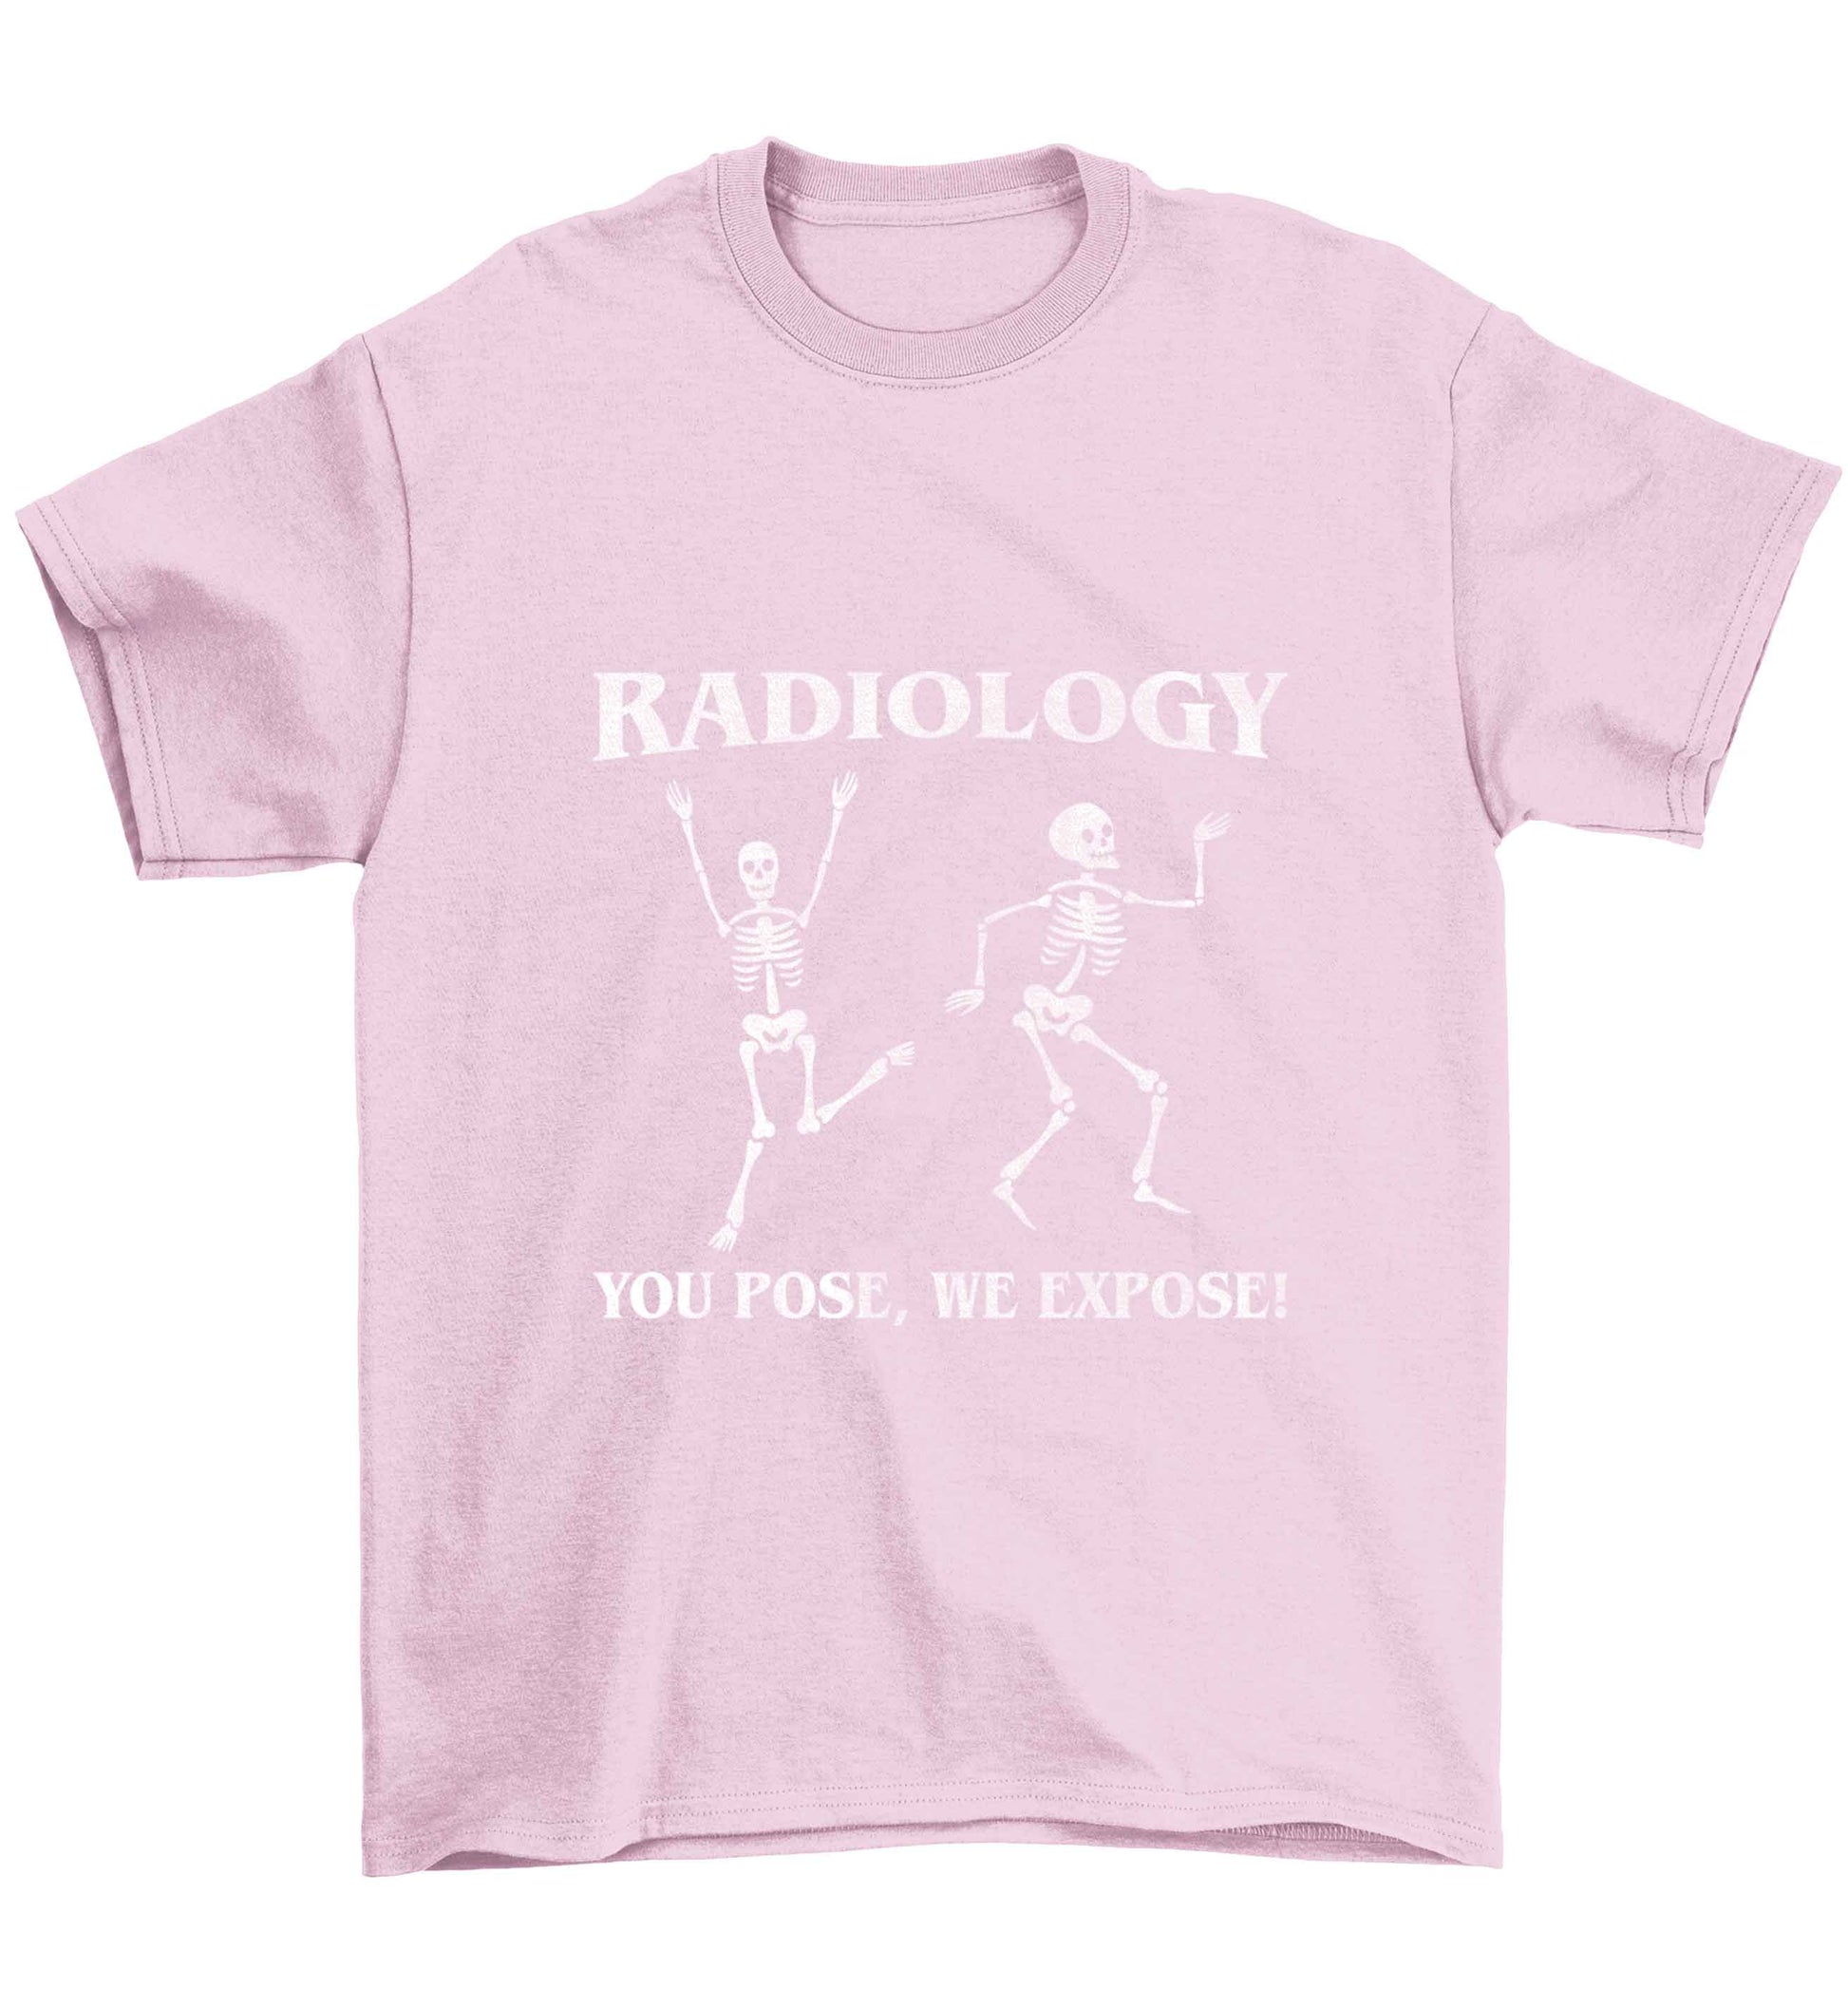 Radiology you pose we expose Children's light pink Tshirt 12-13 Years